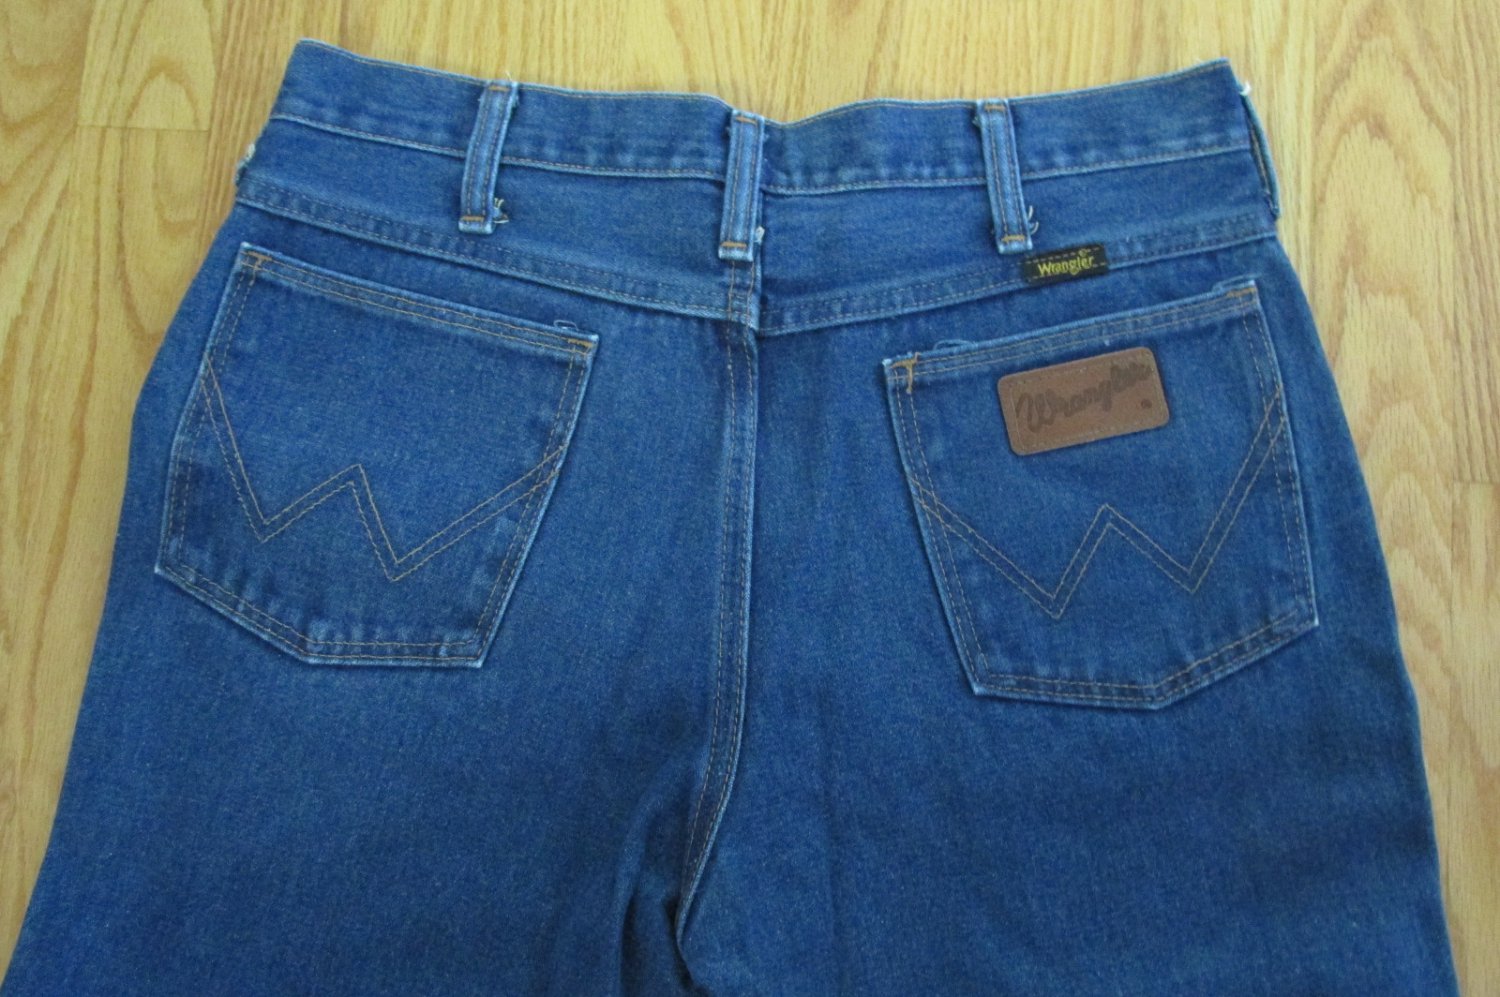 WRANGLER MEN'S SIZE 31 X 29 JEANS MED BLUE STONE WASHED BOOT CUT ...